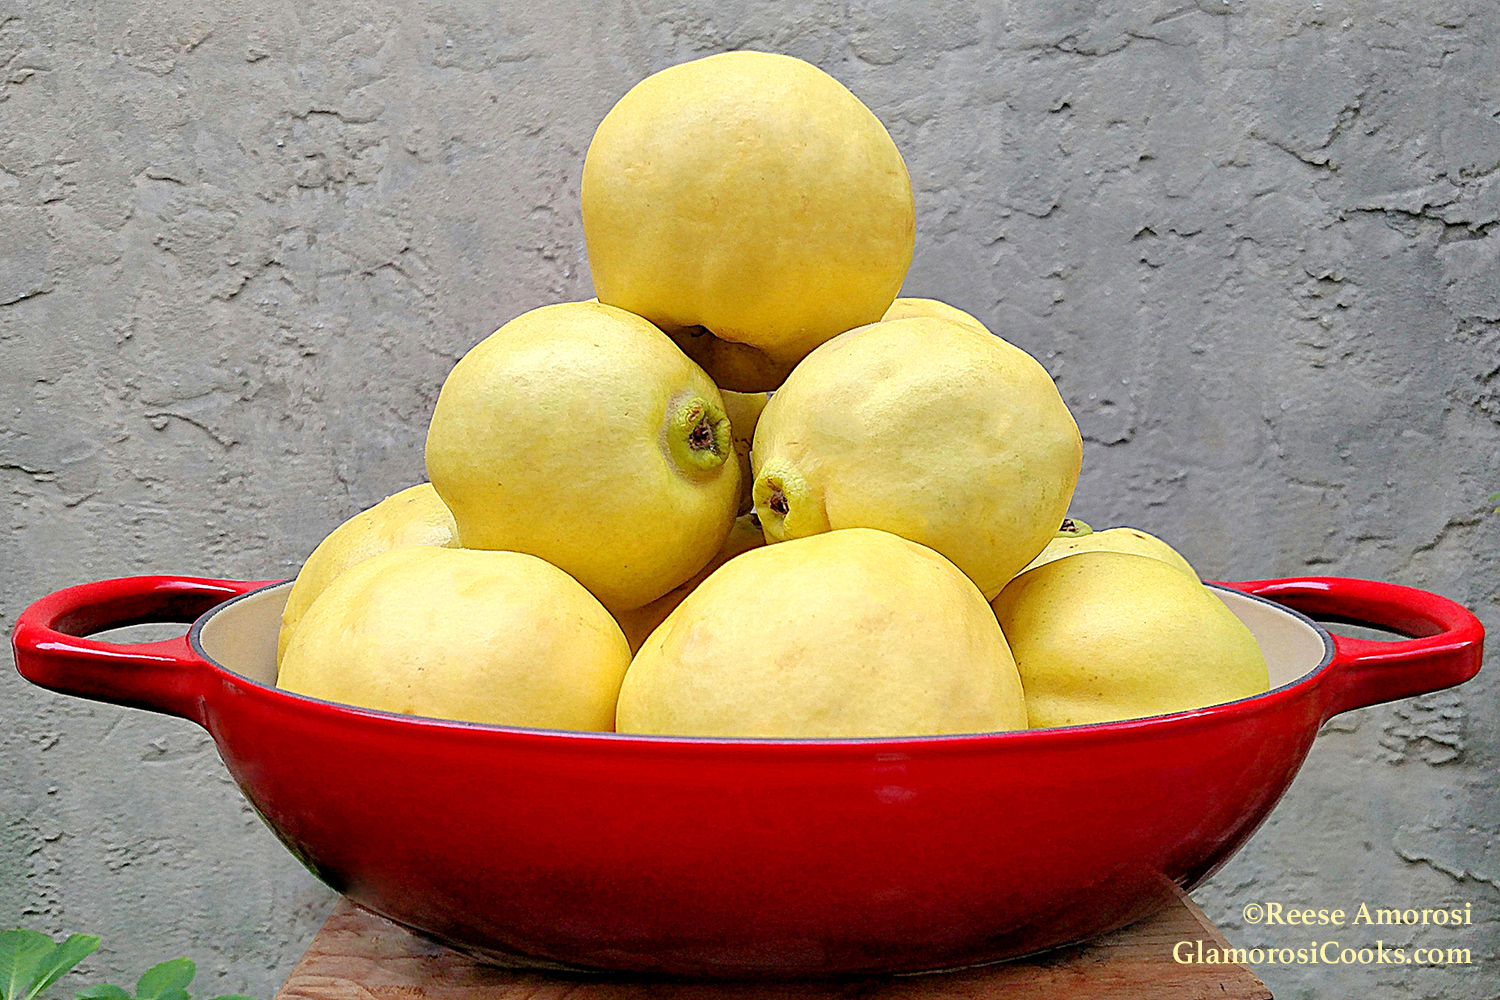 This photo is posted on the "About" page on GlamorosiCooks.com. It is a horizontal photo showing a red pan containing quince arranged in a pyramid formation. The pan is on a wood stool, and the background is a grey stucco wall. 